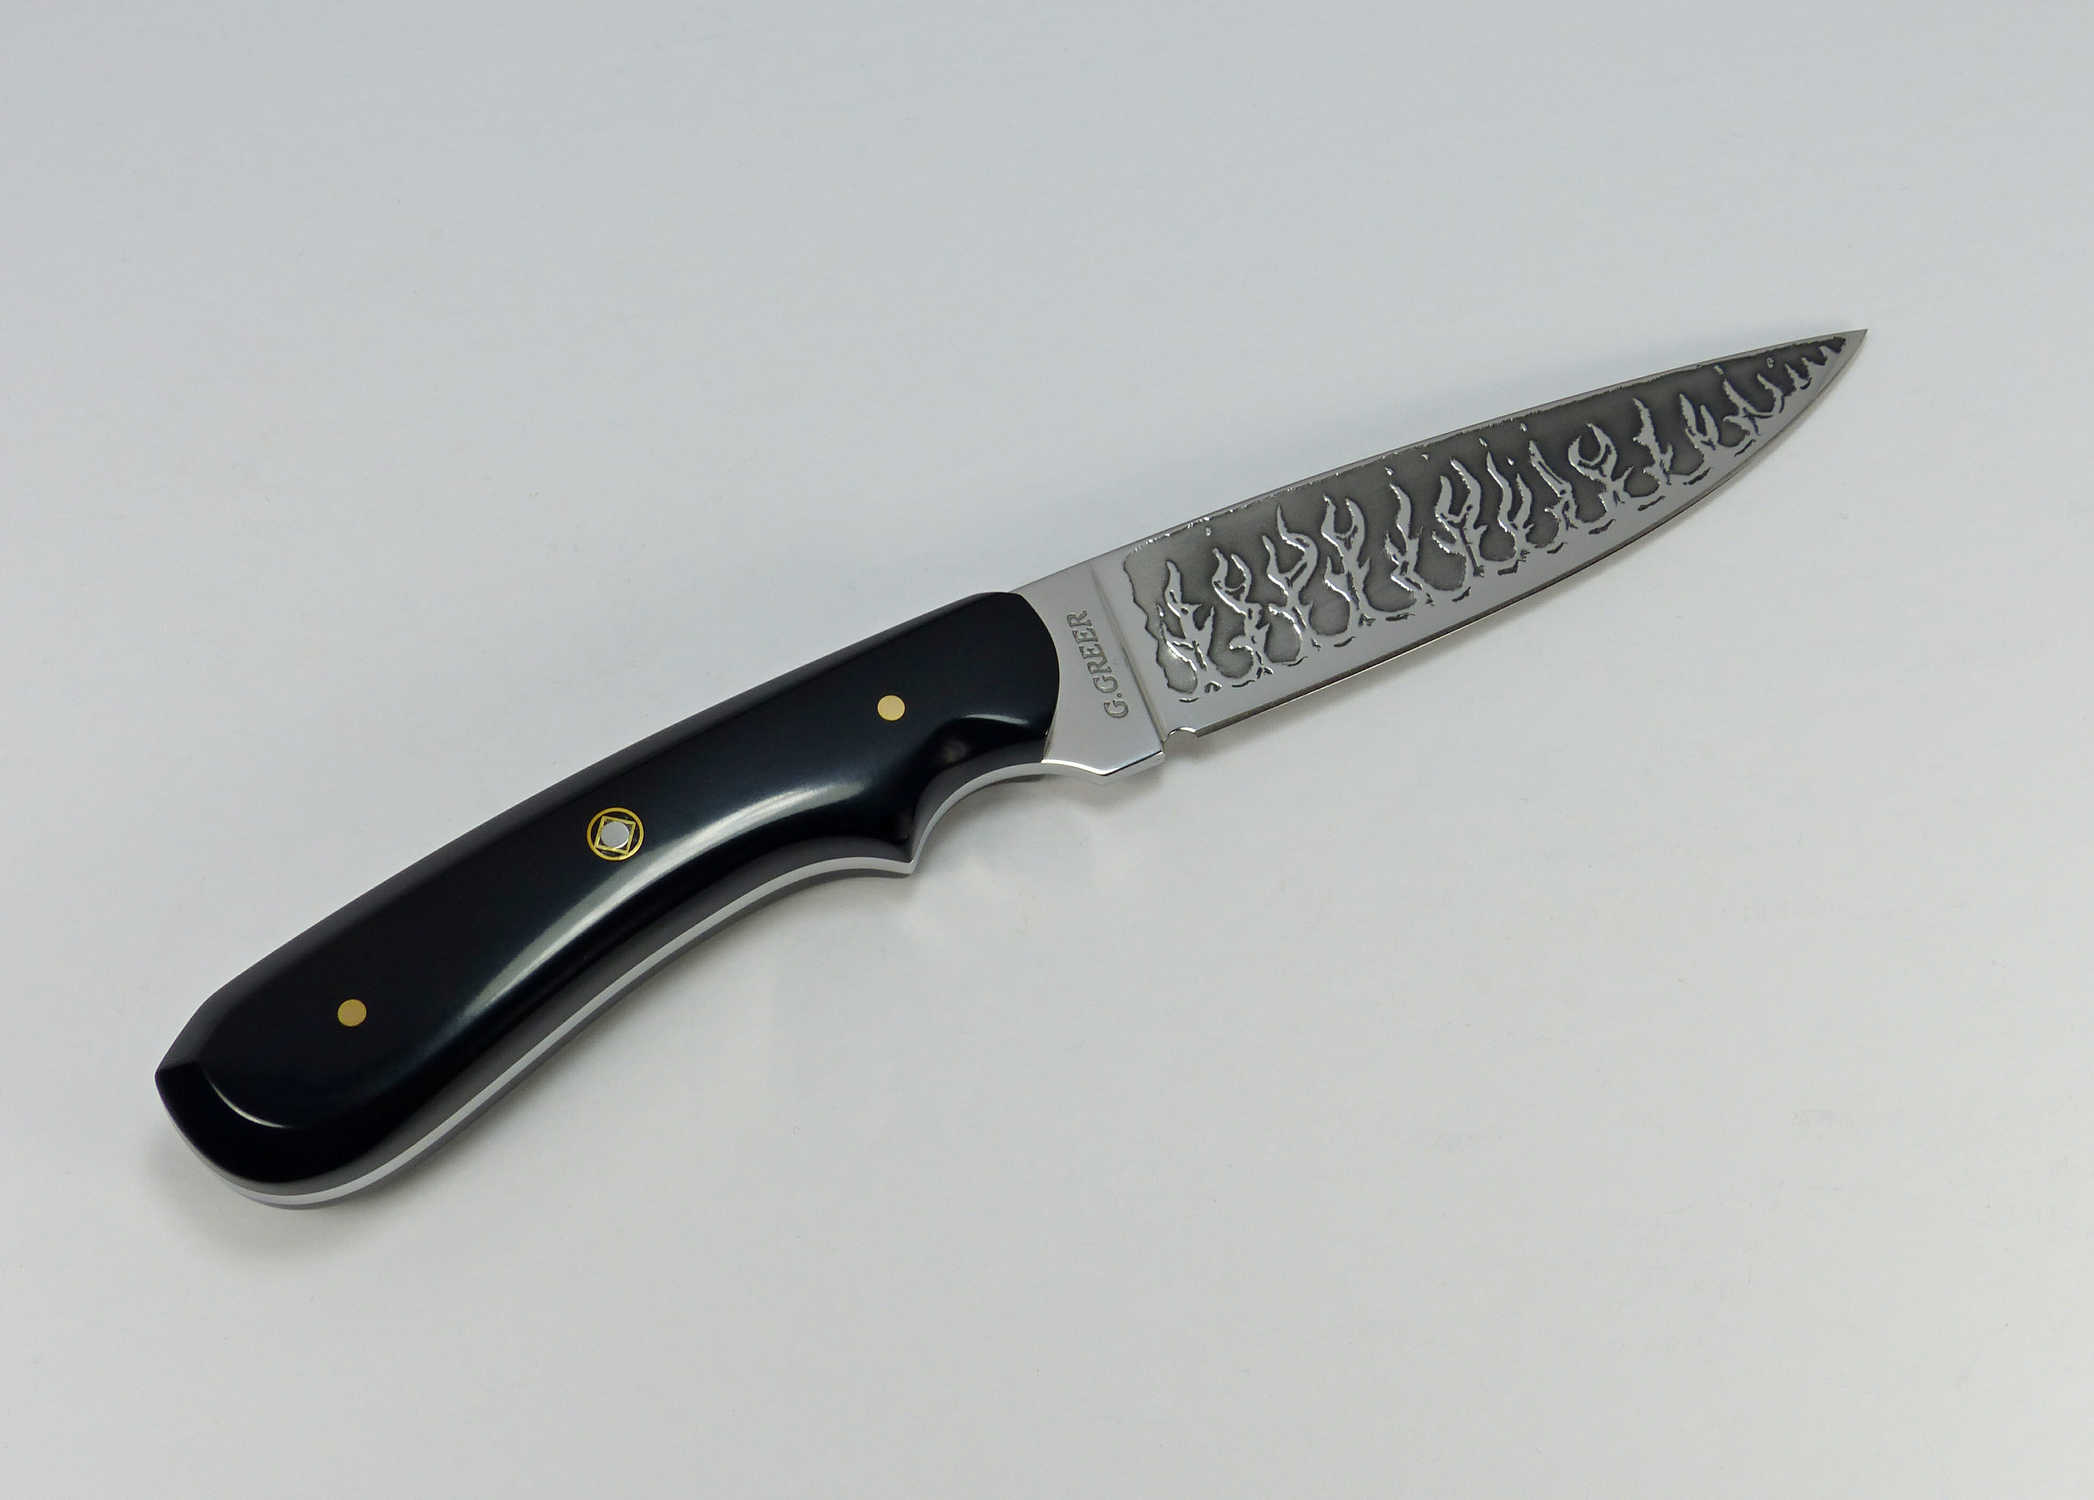 Black handled art knife with flames etched into blade of knife